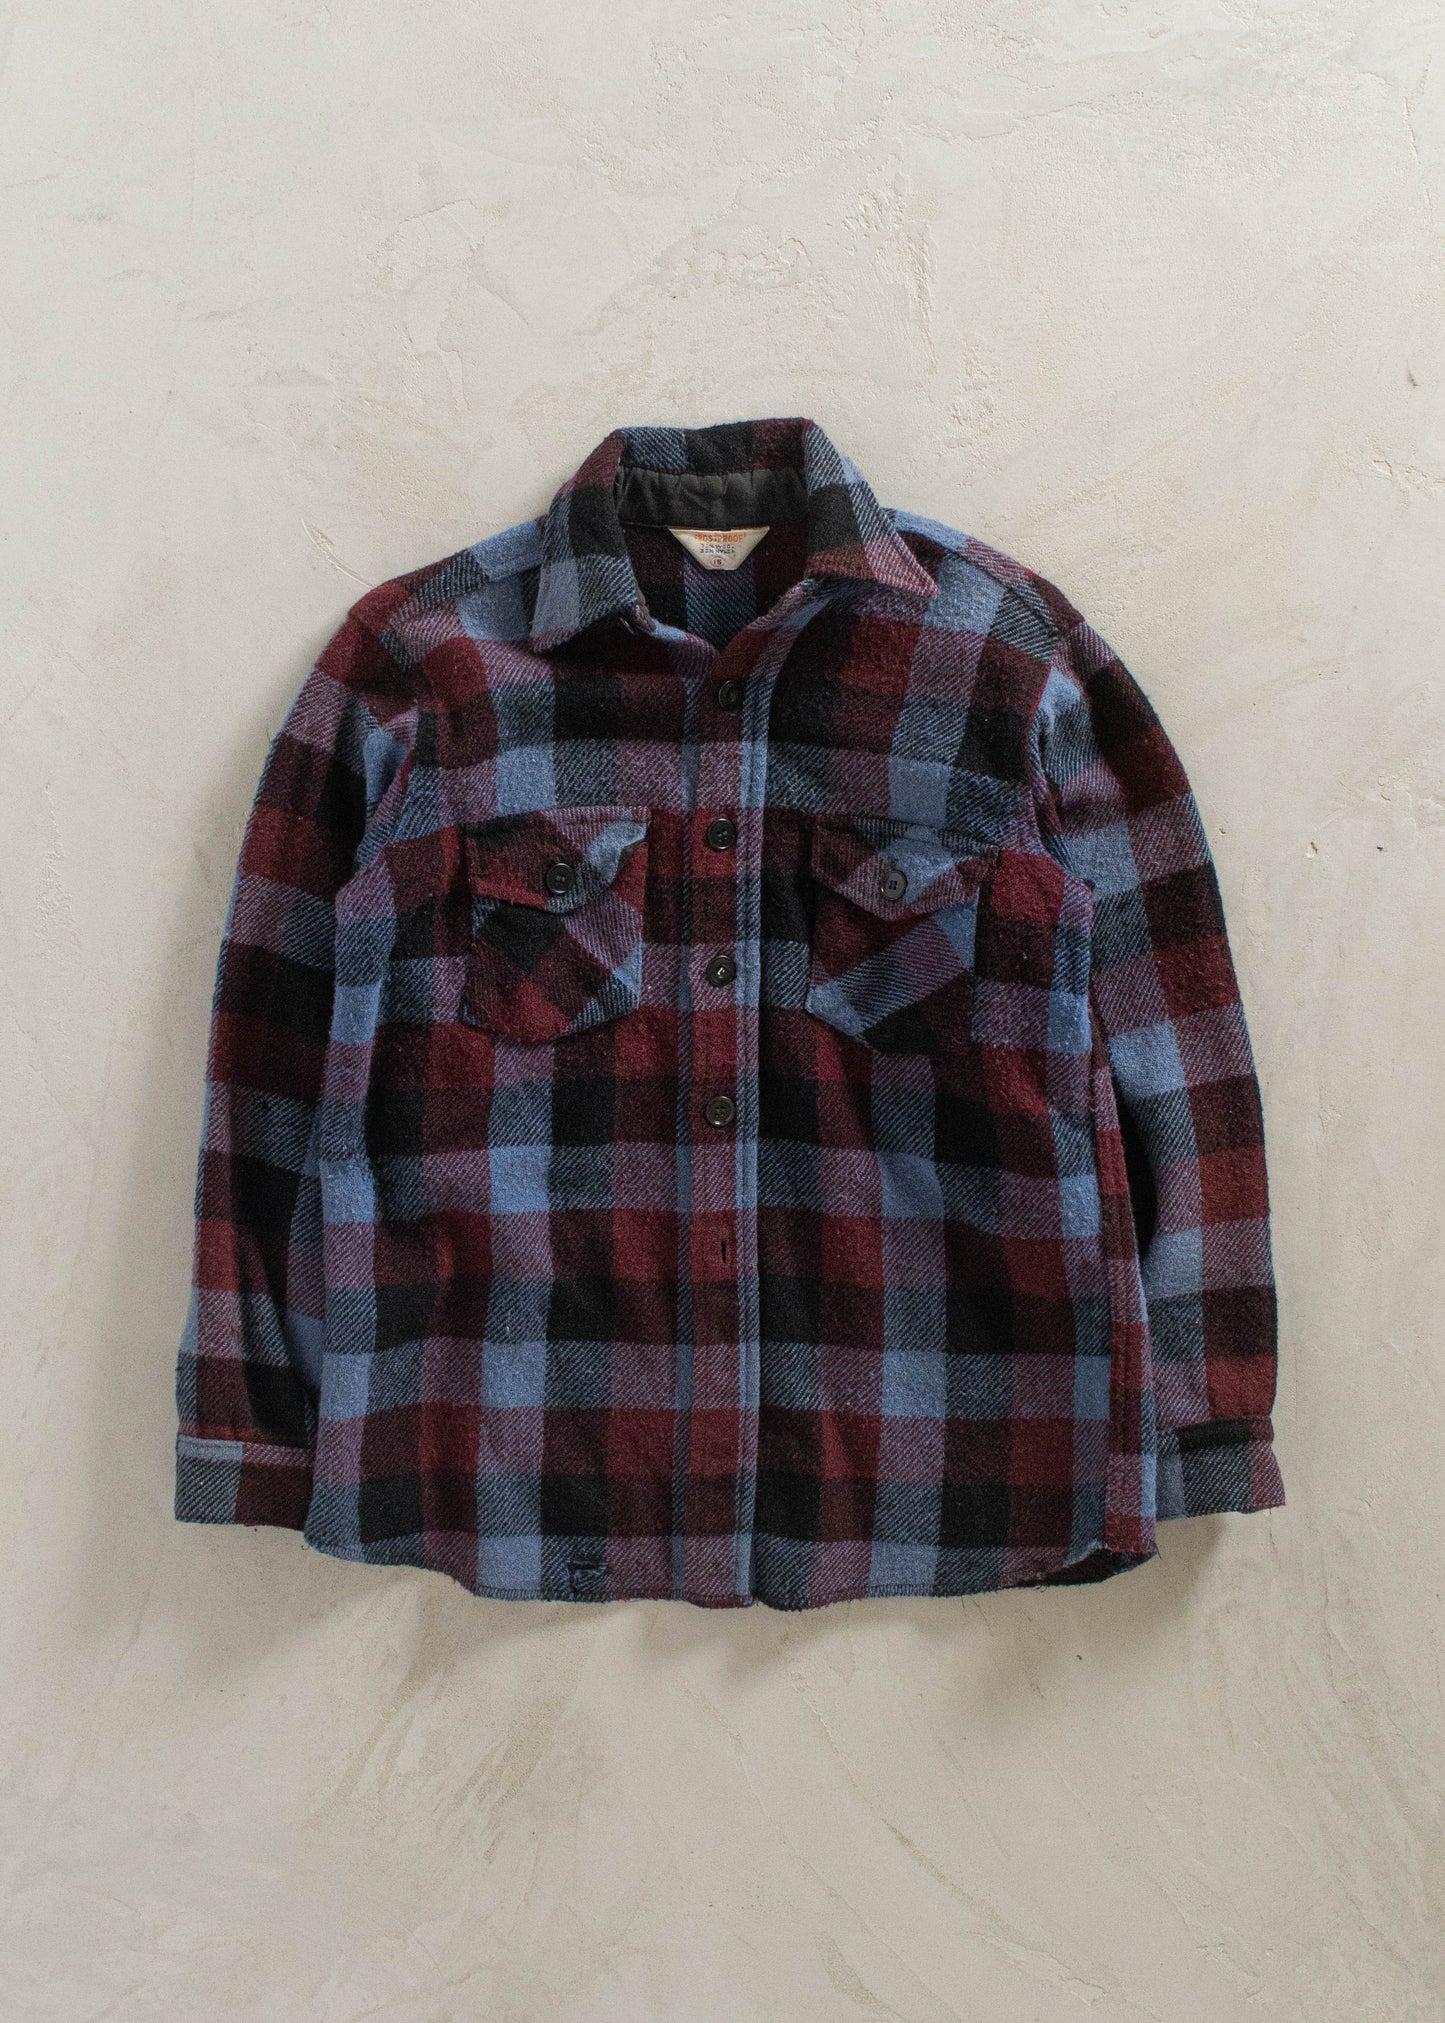 1980s Frostproof Wool Flannel Button Up Shirt Size XS/S